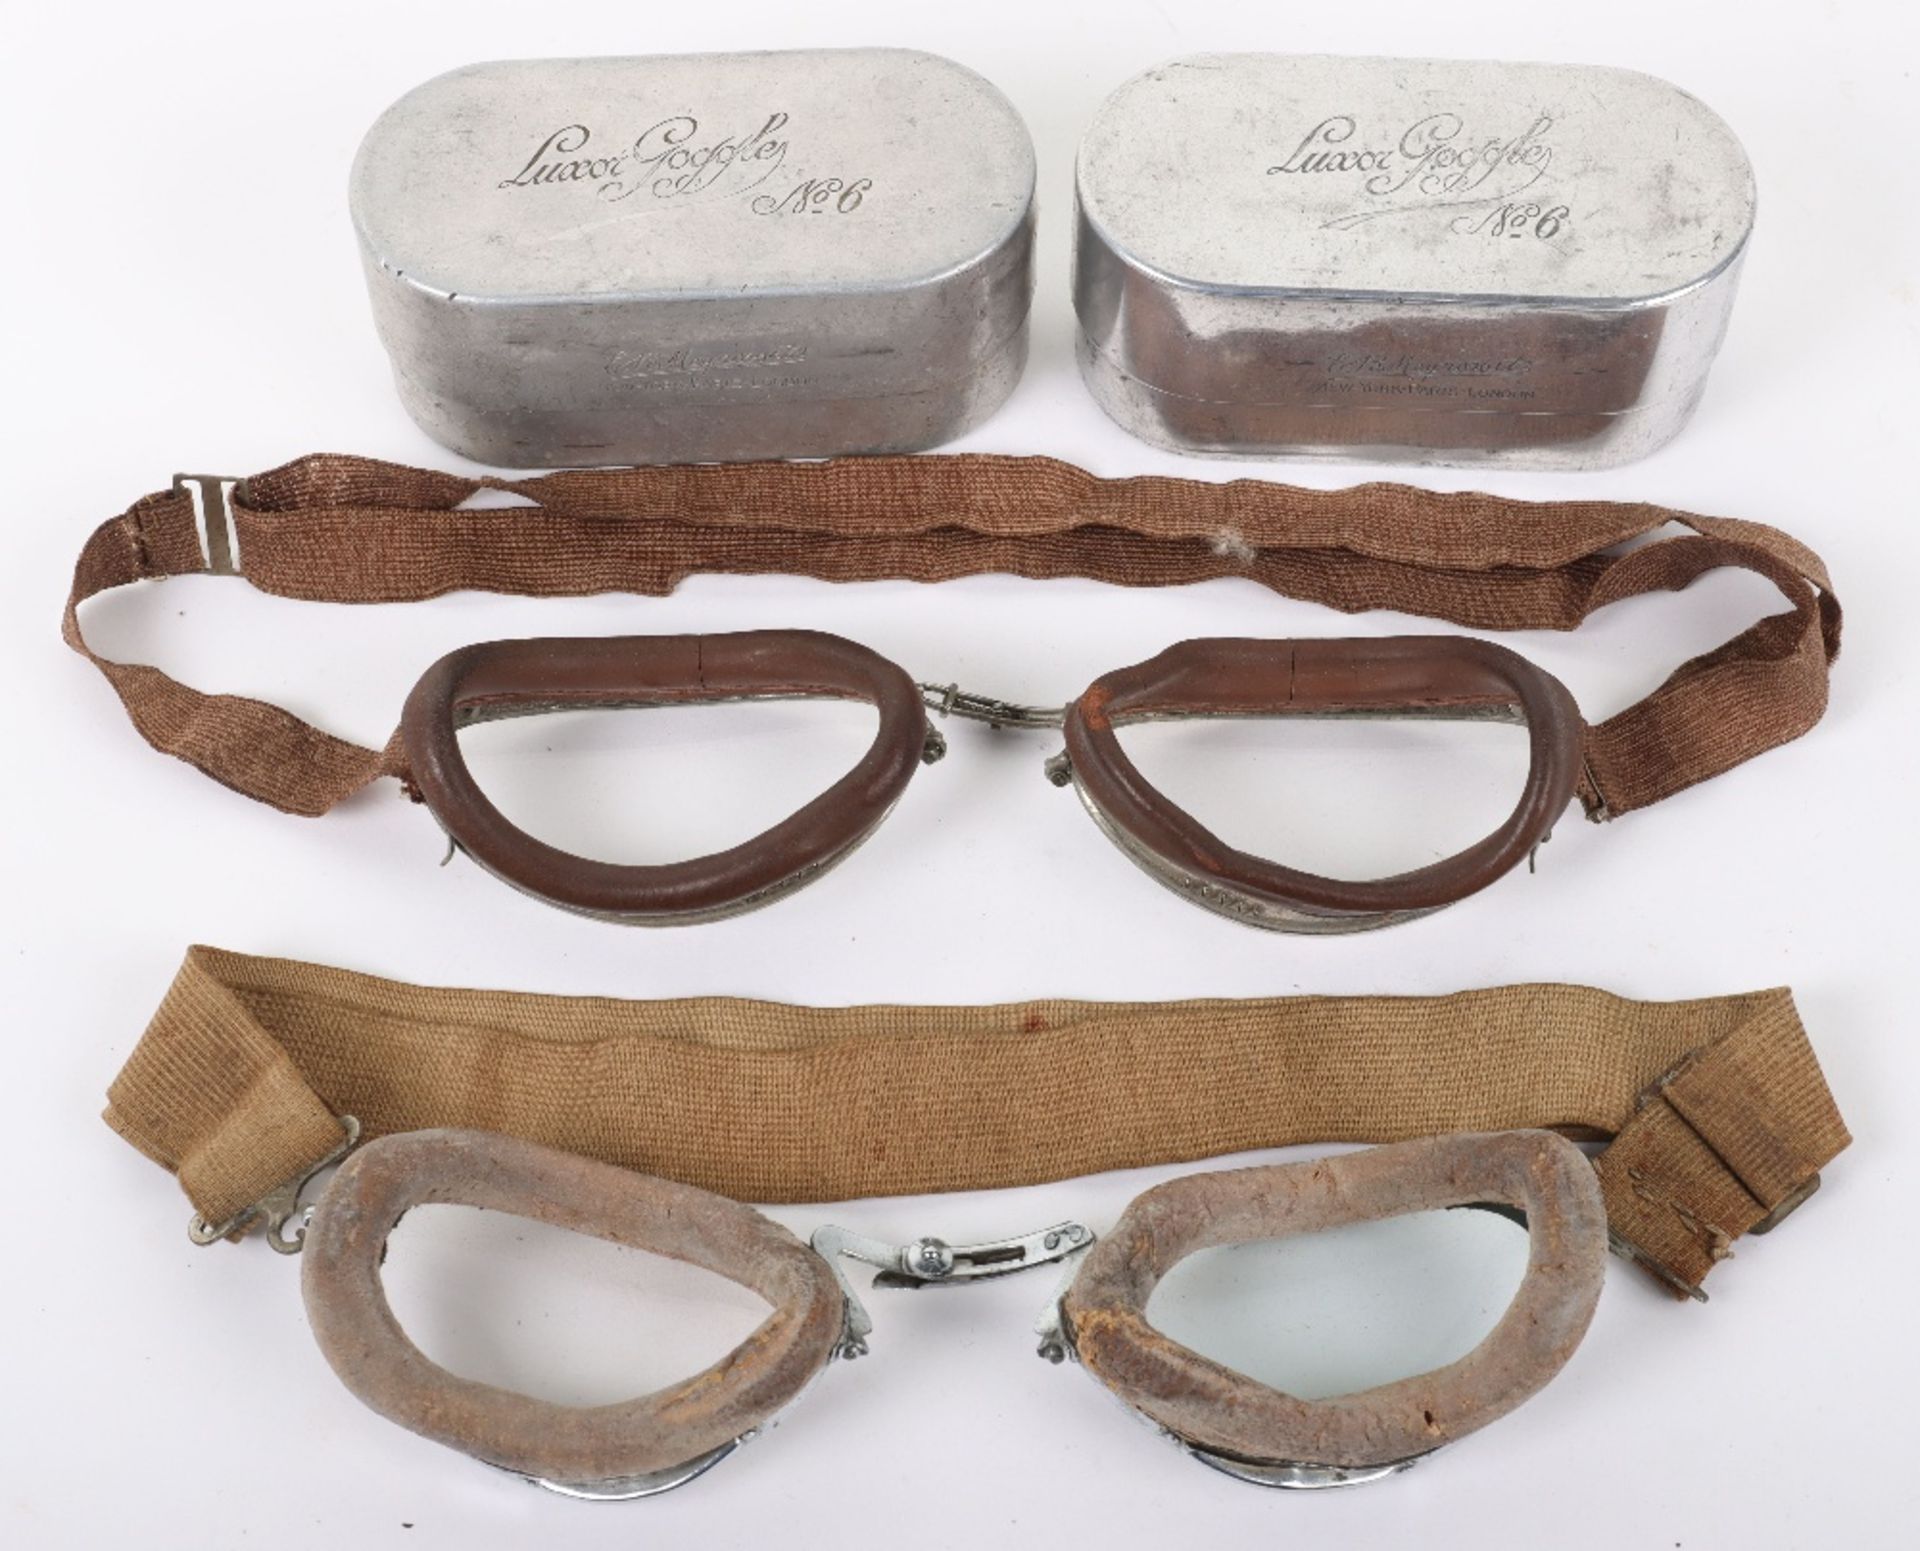 2x Pairs of Aviators Luxor Goggles No6 by E B Meyrowitz - Image 4 of 6